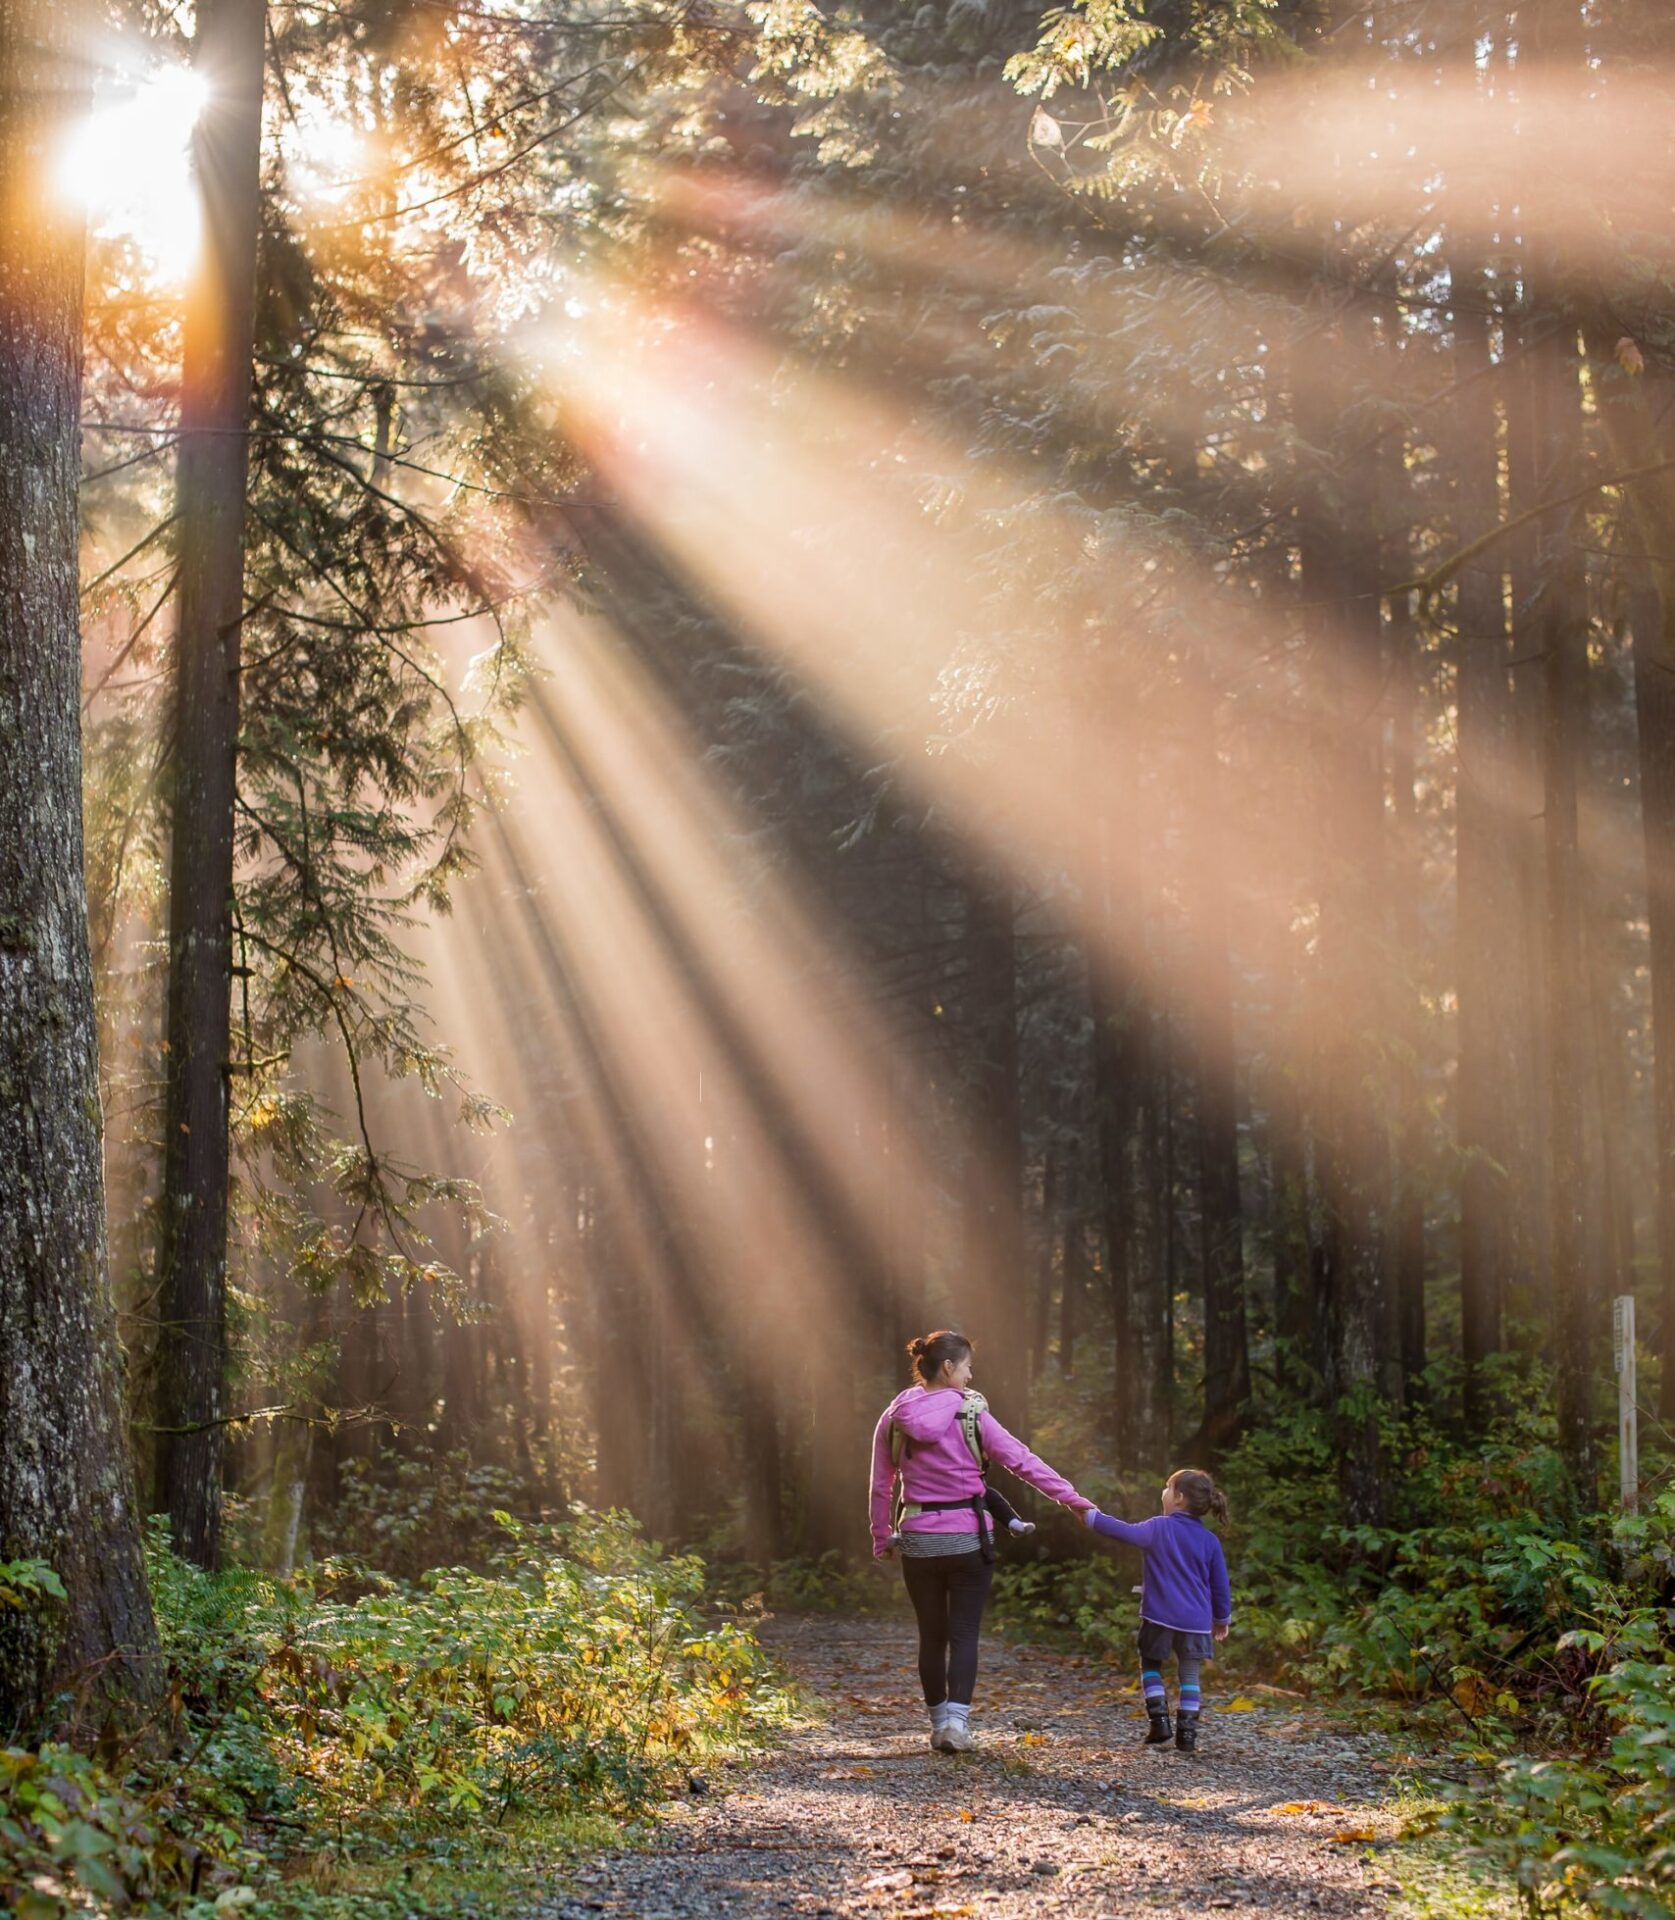 A woman and boy walk in the sun filled forest hand-in-hand.